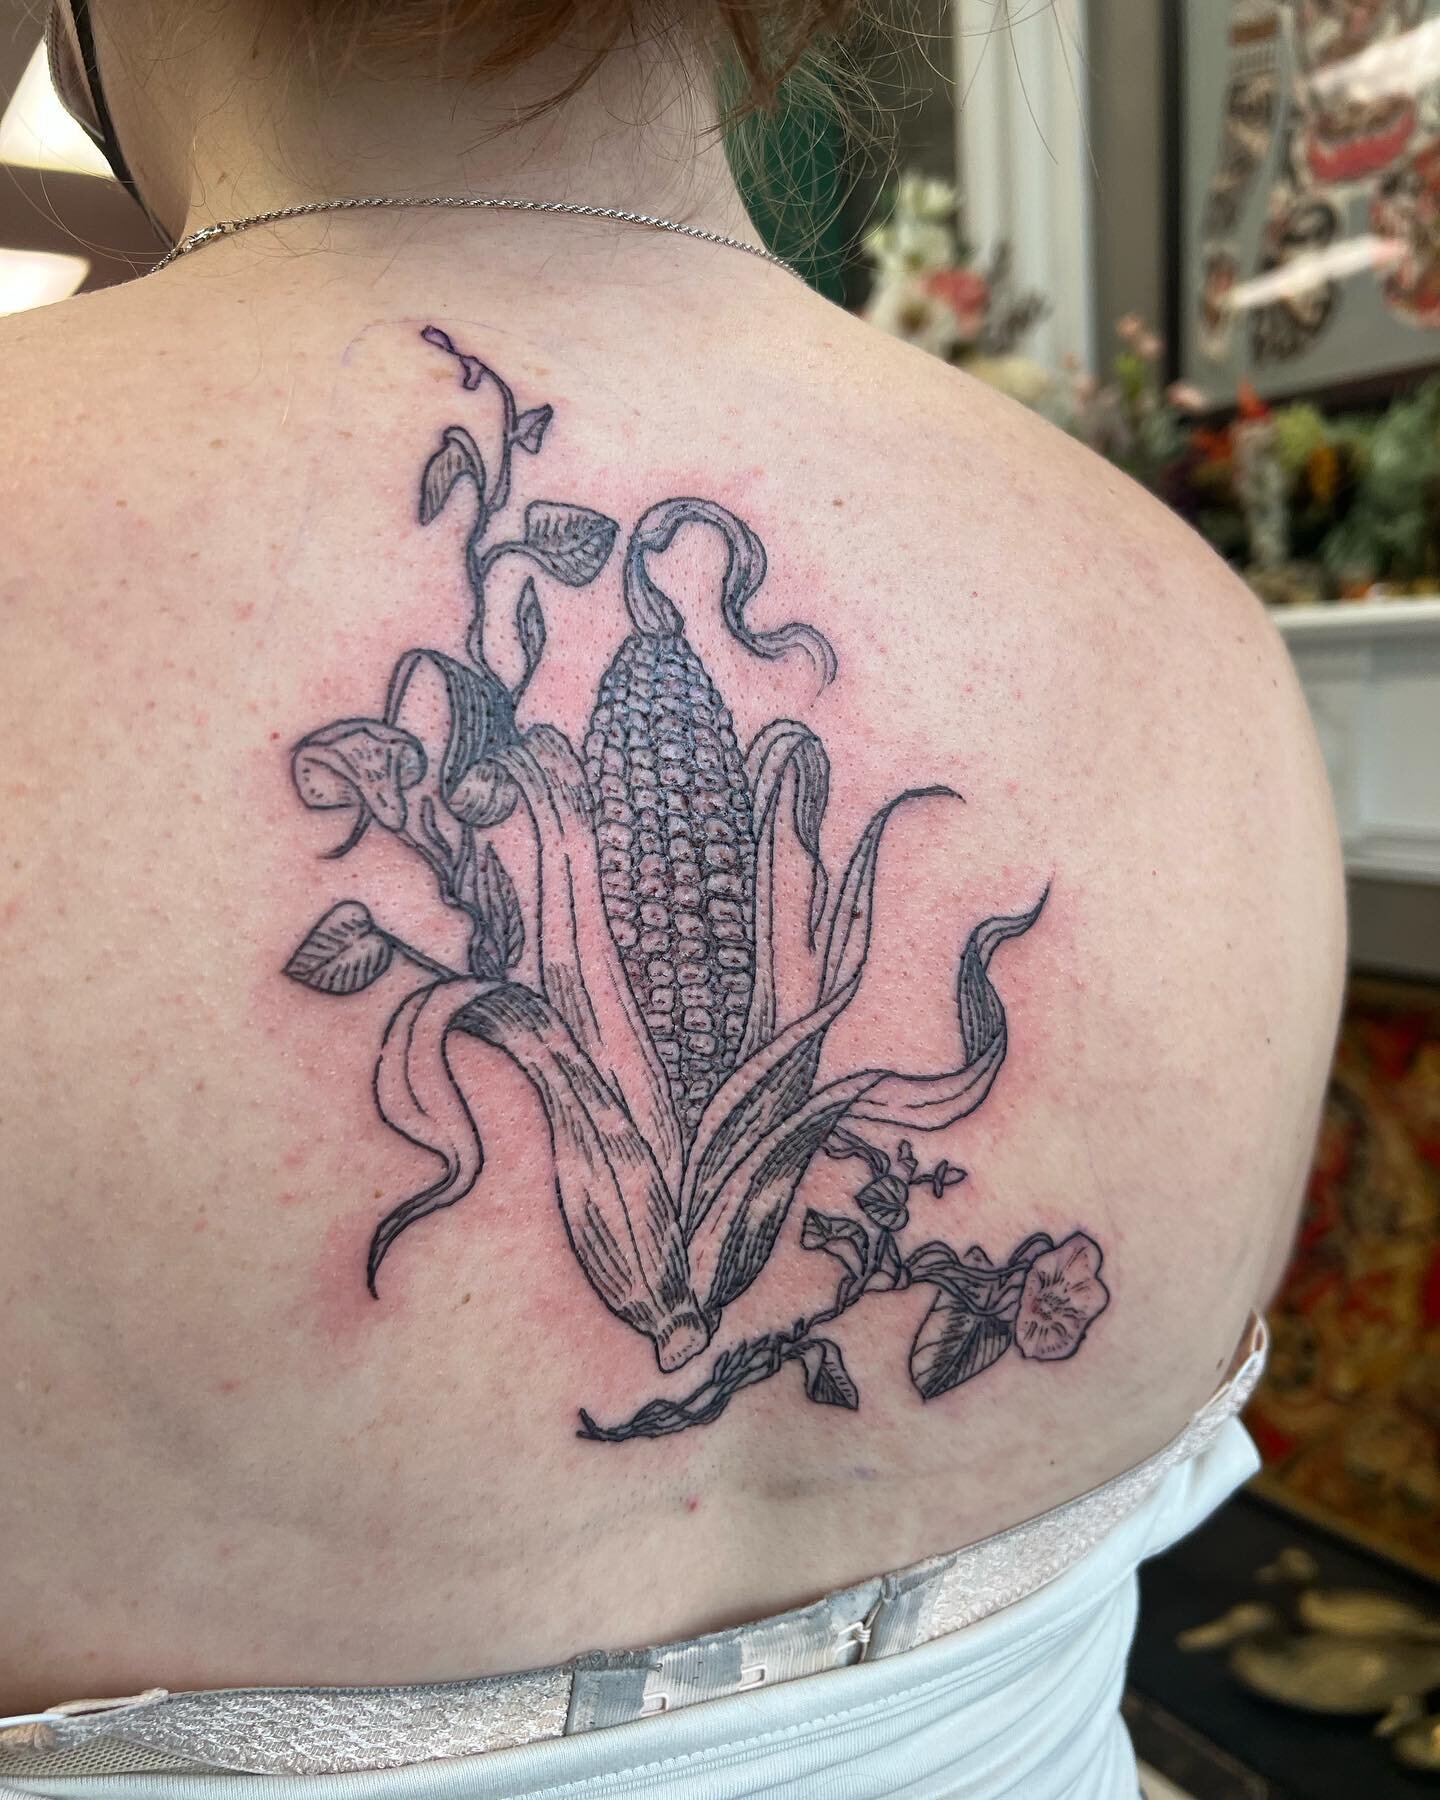 Aw shucks! Things got a little corny in the studio yesterday!

Bark for @themutemaker in the comments 

In Love Tattoo 1130 Burke St. Winston-Salem #nctattooer #nctattooers #vegan #vegantattooer #vegantattooers #nctattoo #dtwsnc #wsnclocal #wsncsmall